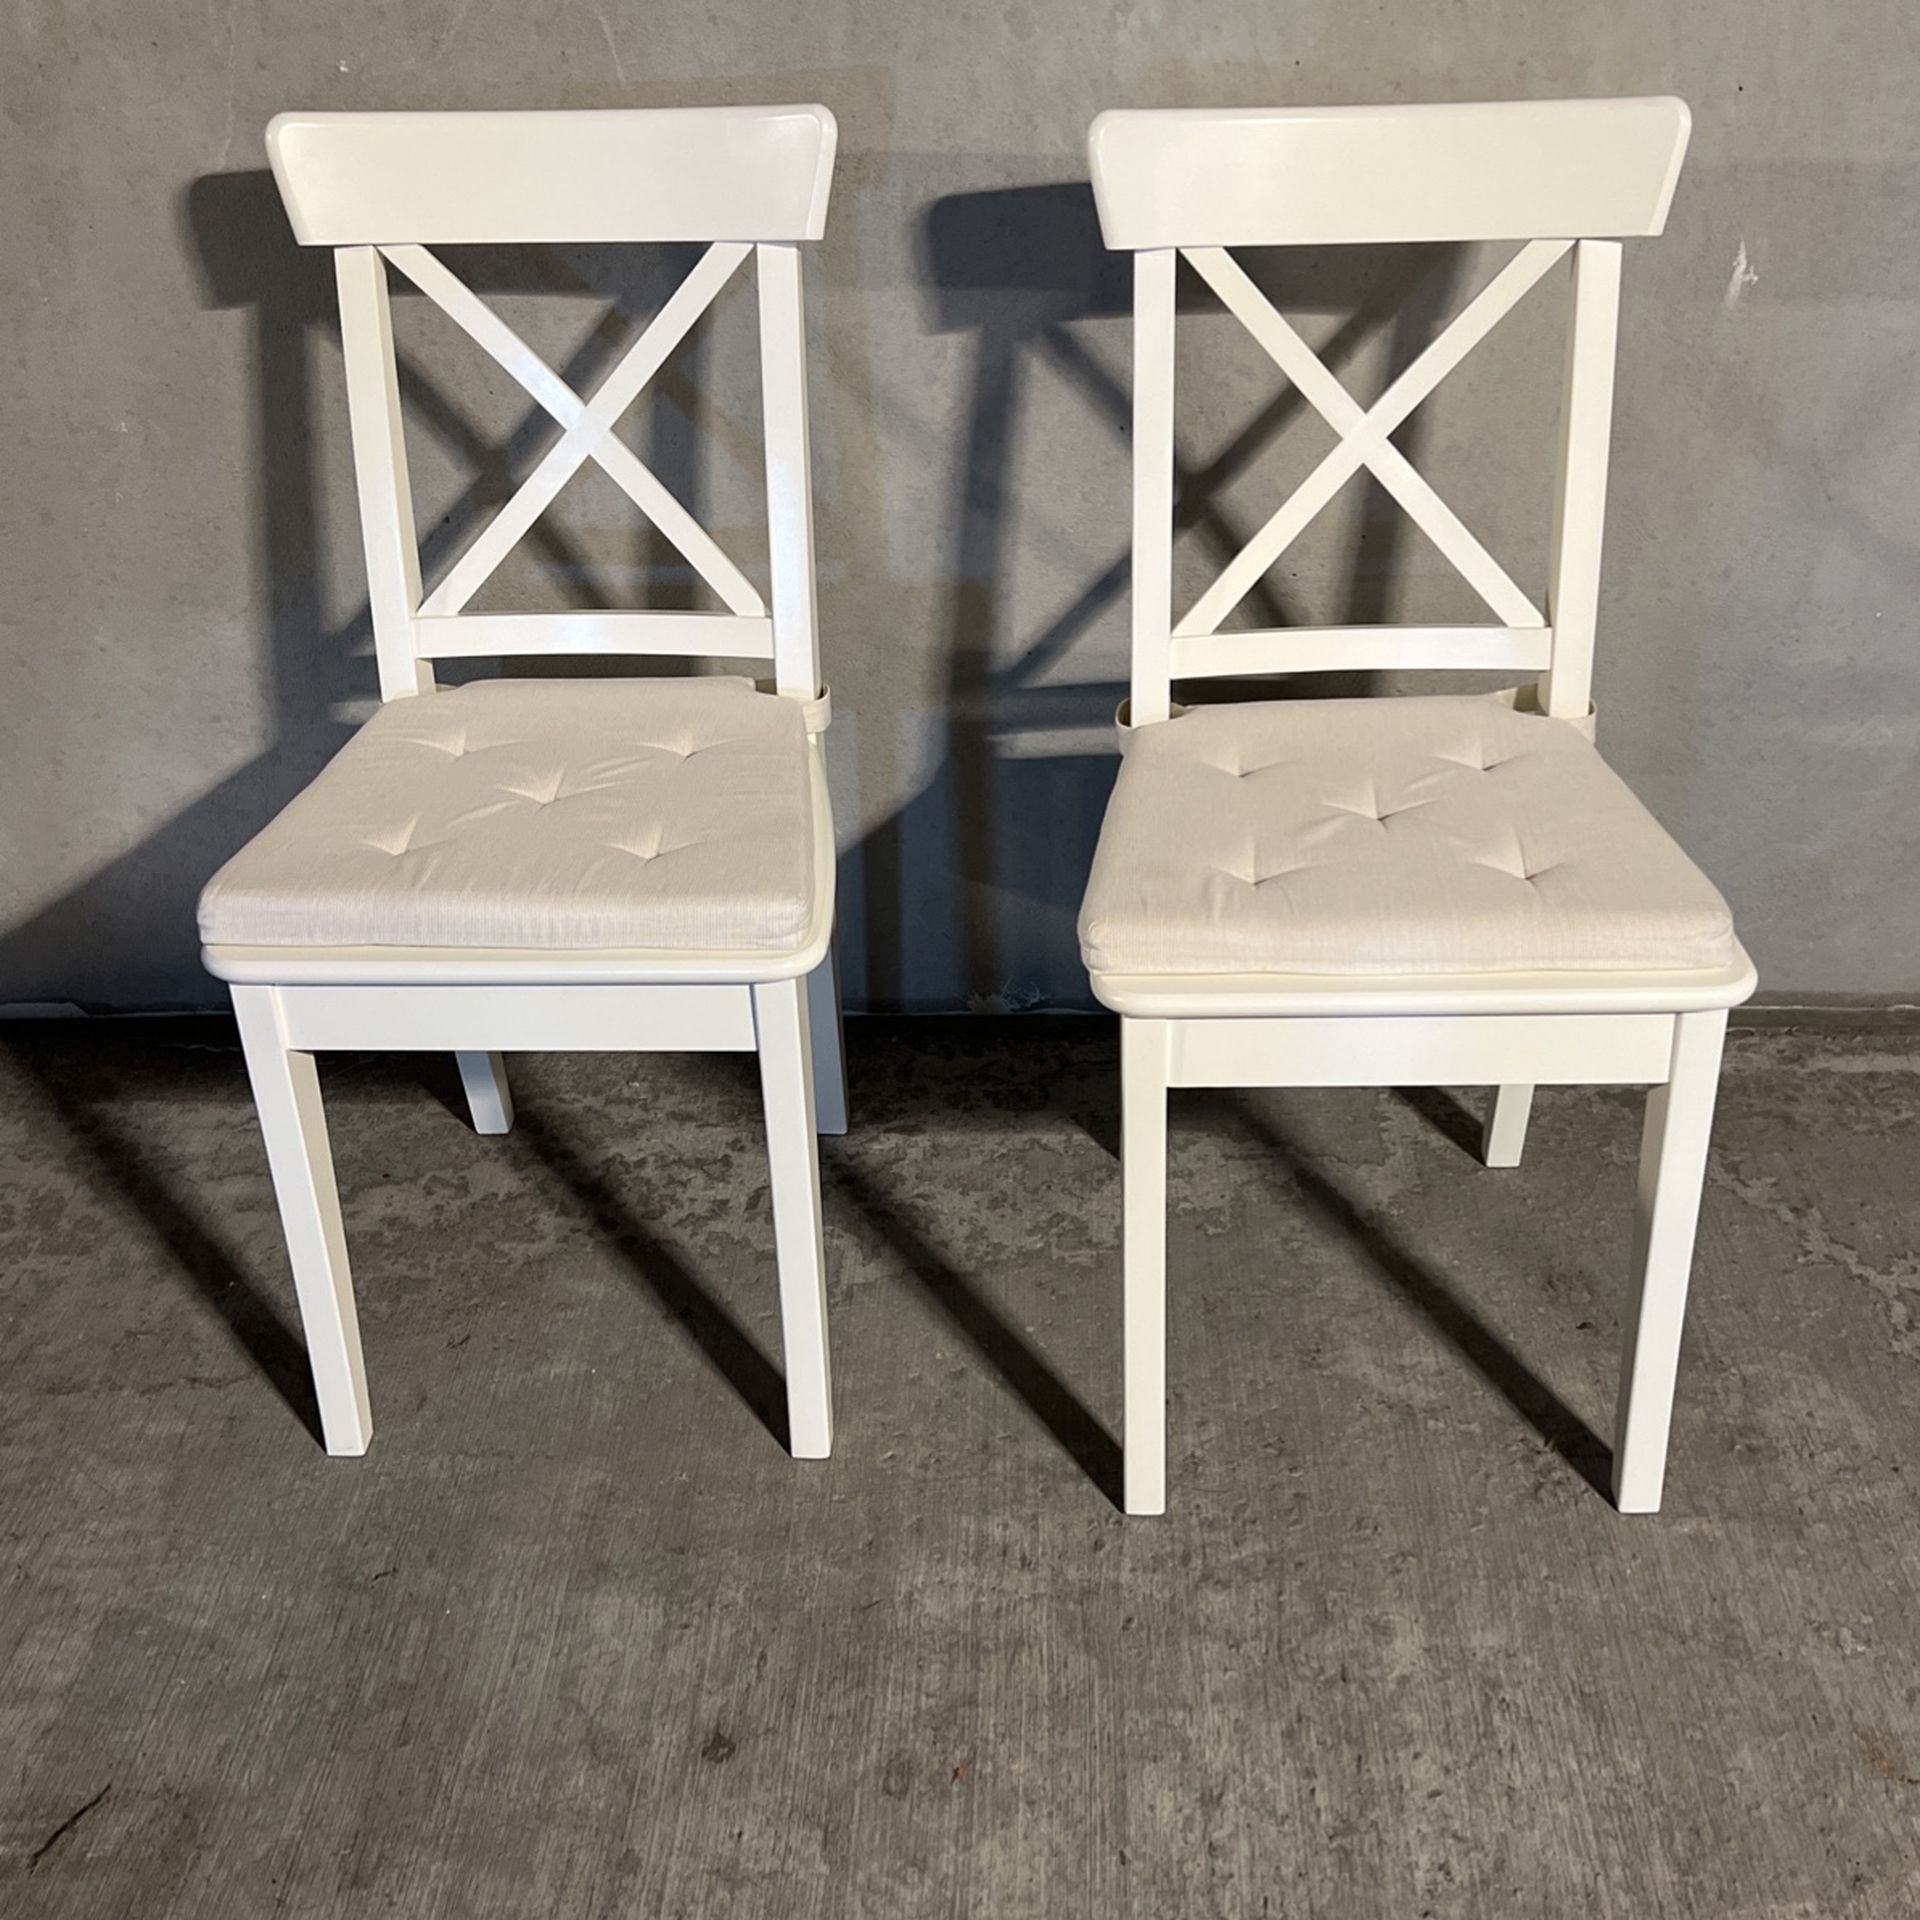 2 White Cross Cross Kitchen  Chairs  With Cushions So I